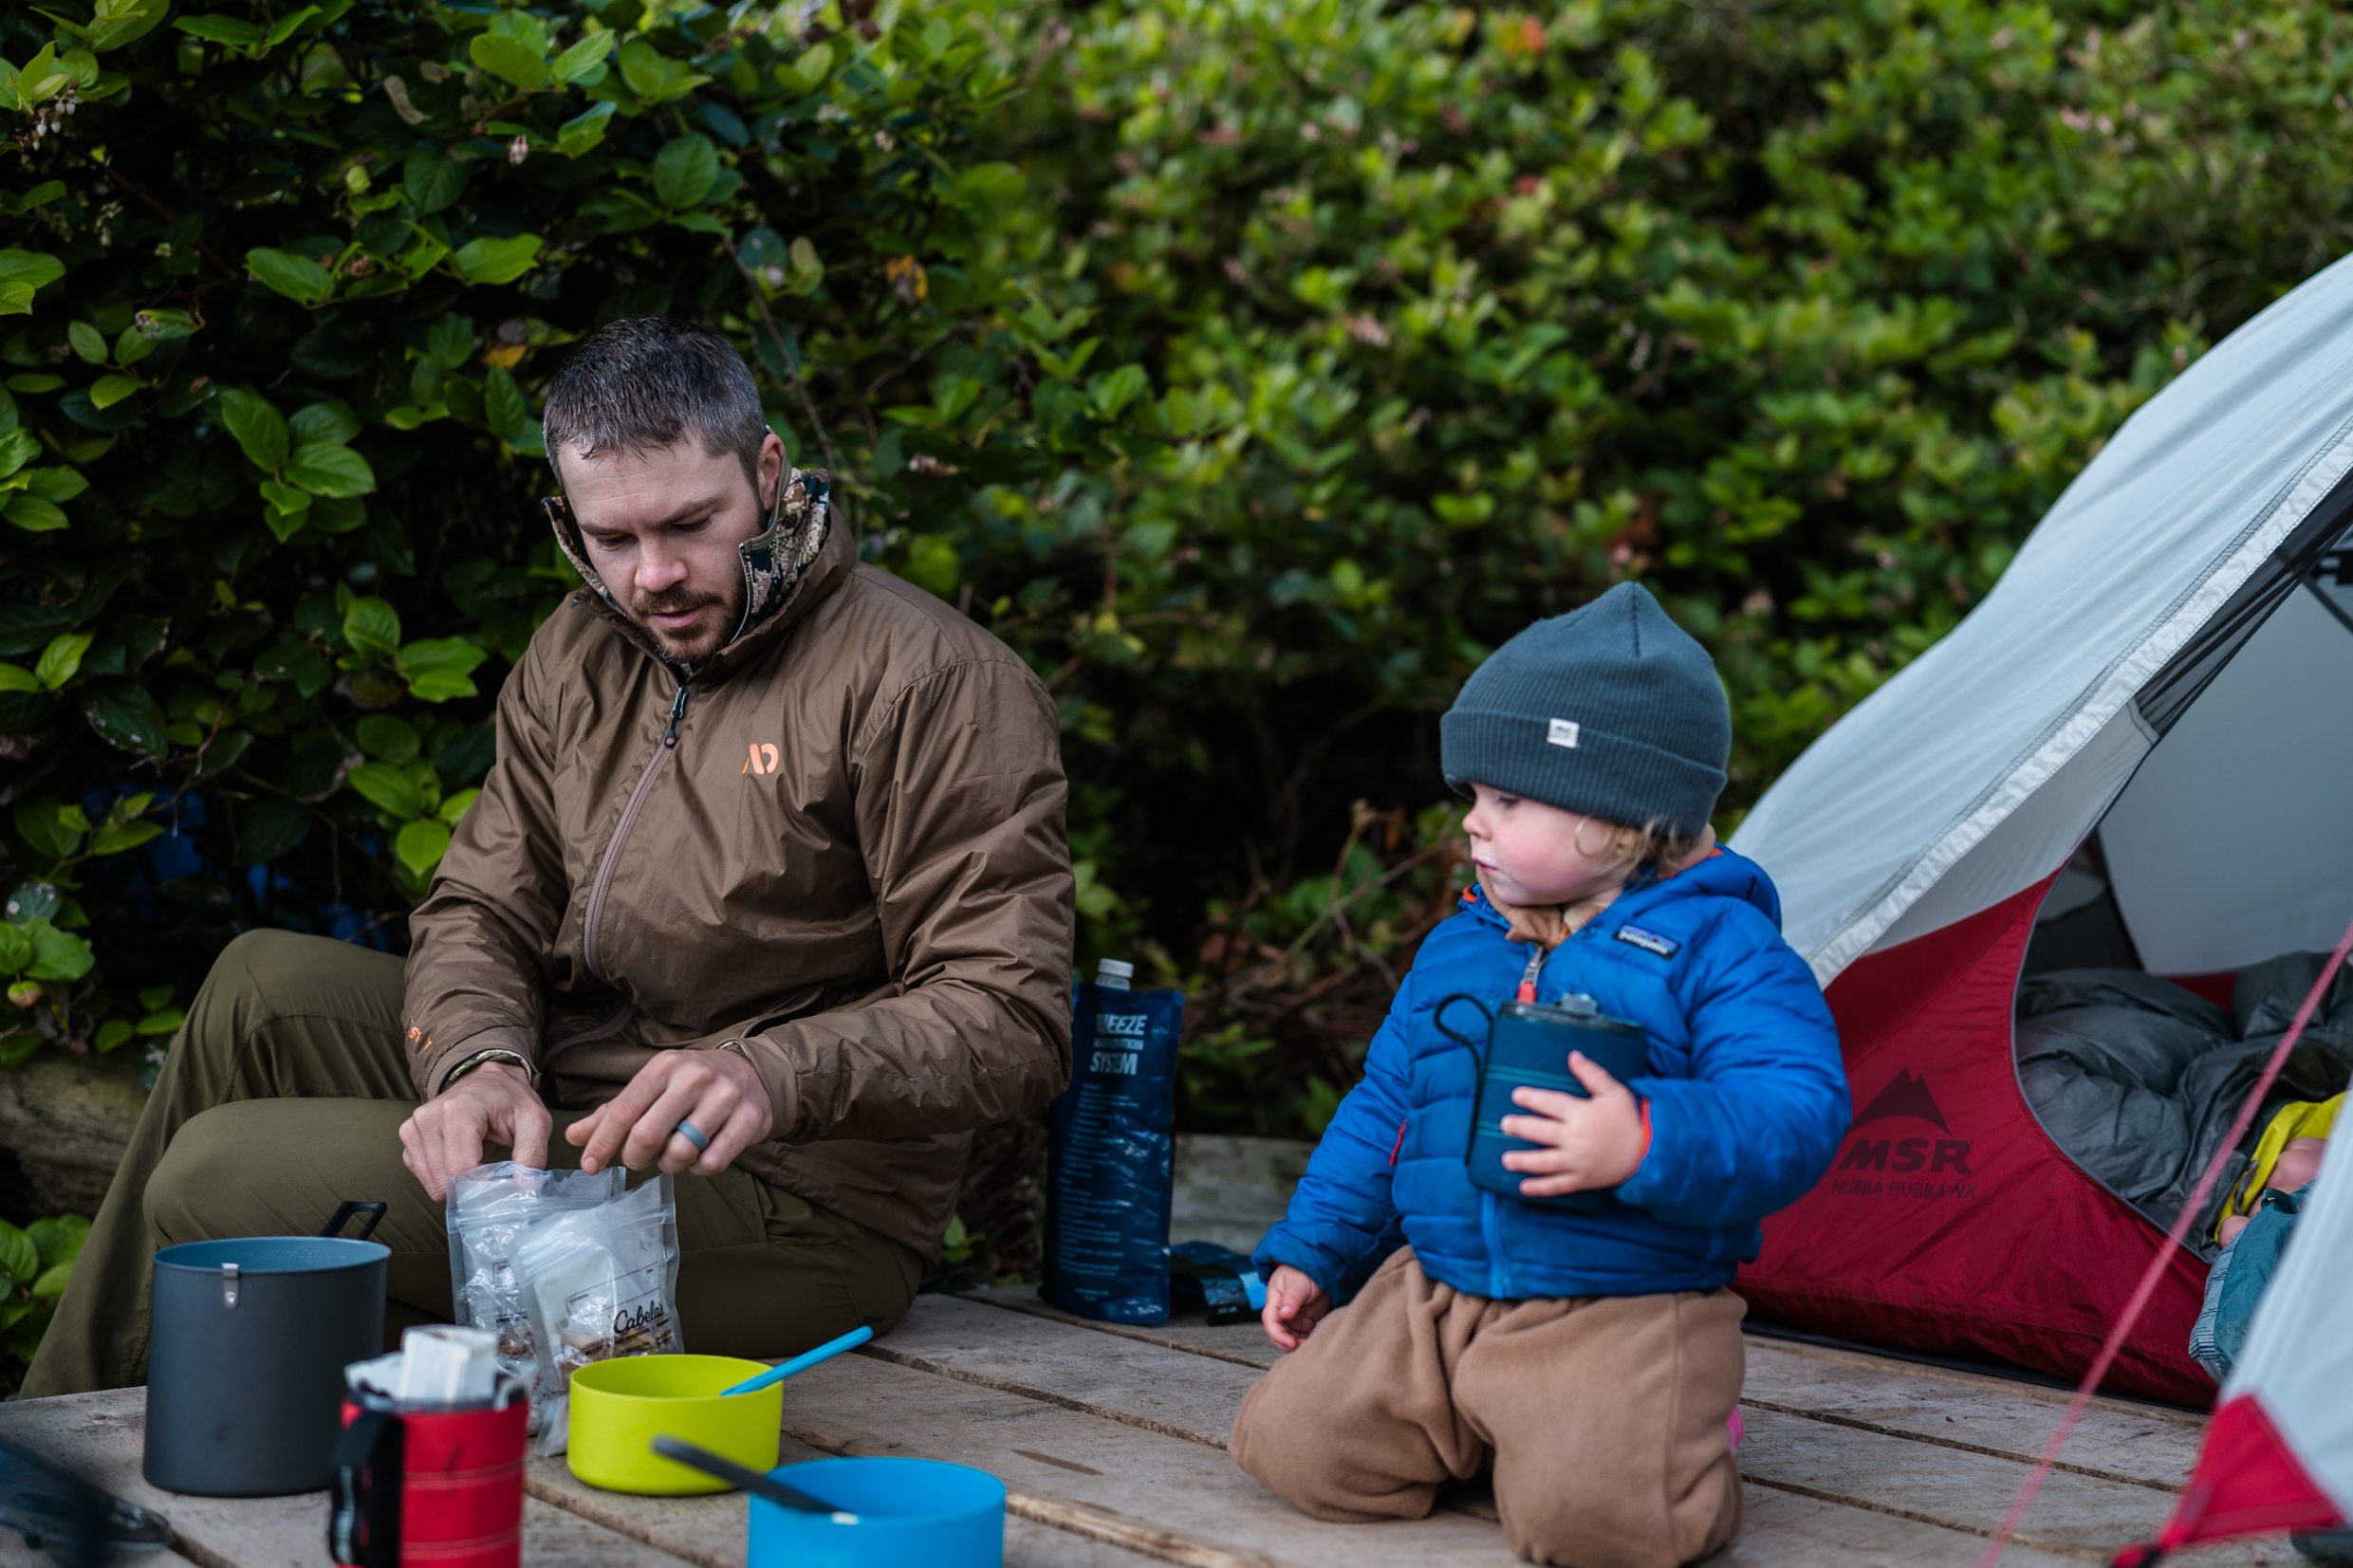 Man in brown jacket sits on tent platform preparing breakfast while backpacking with his toddler who sits beside him.